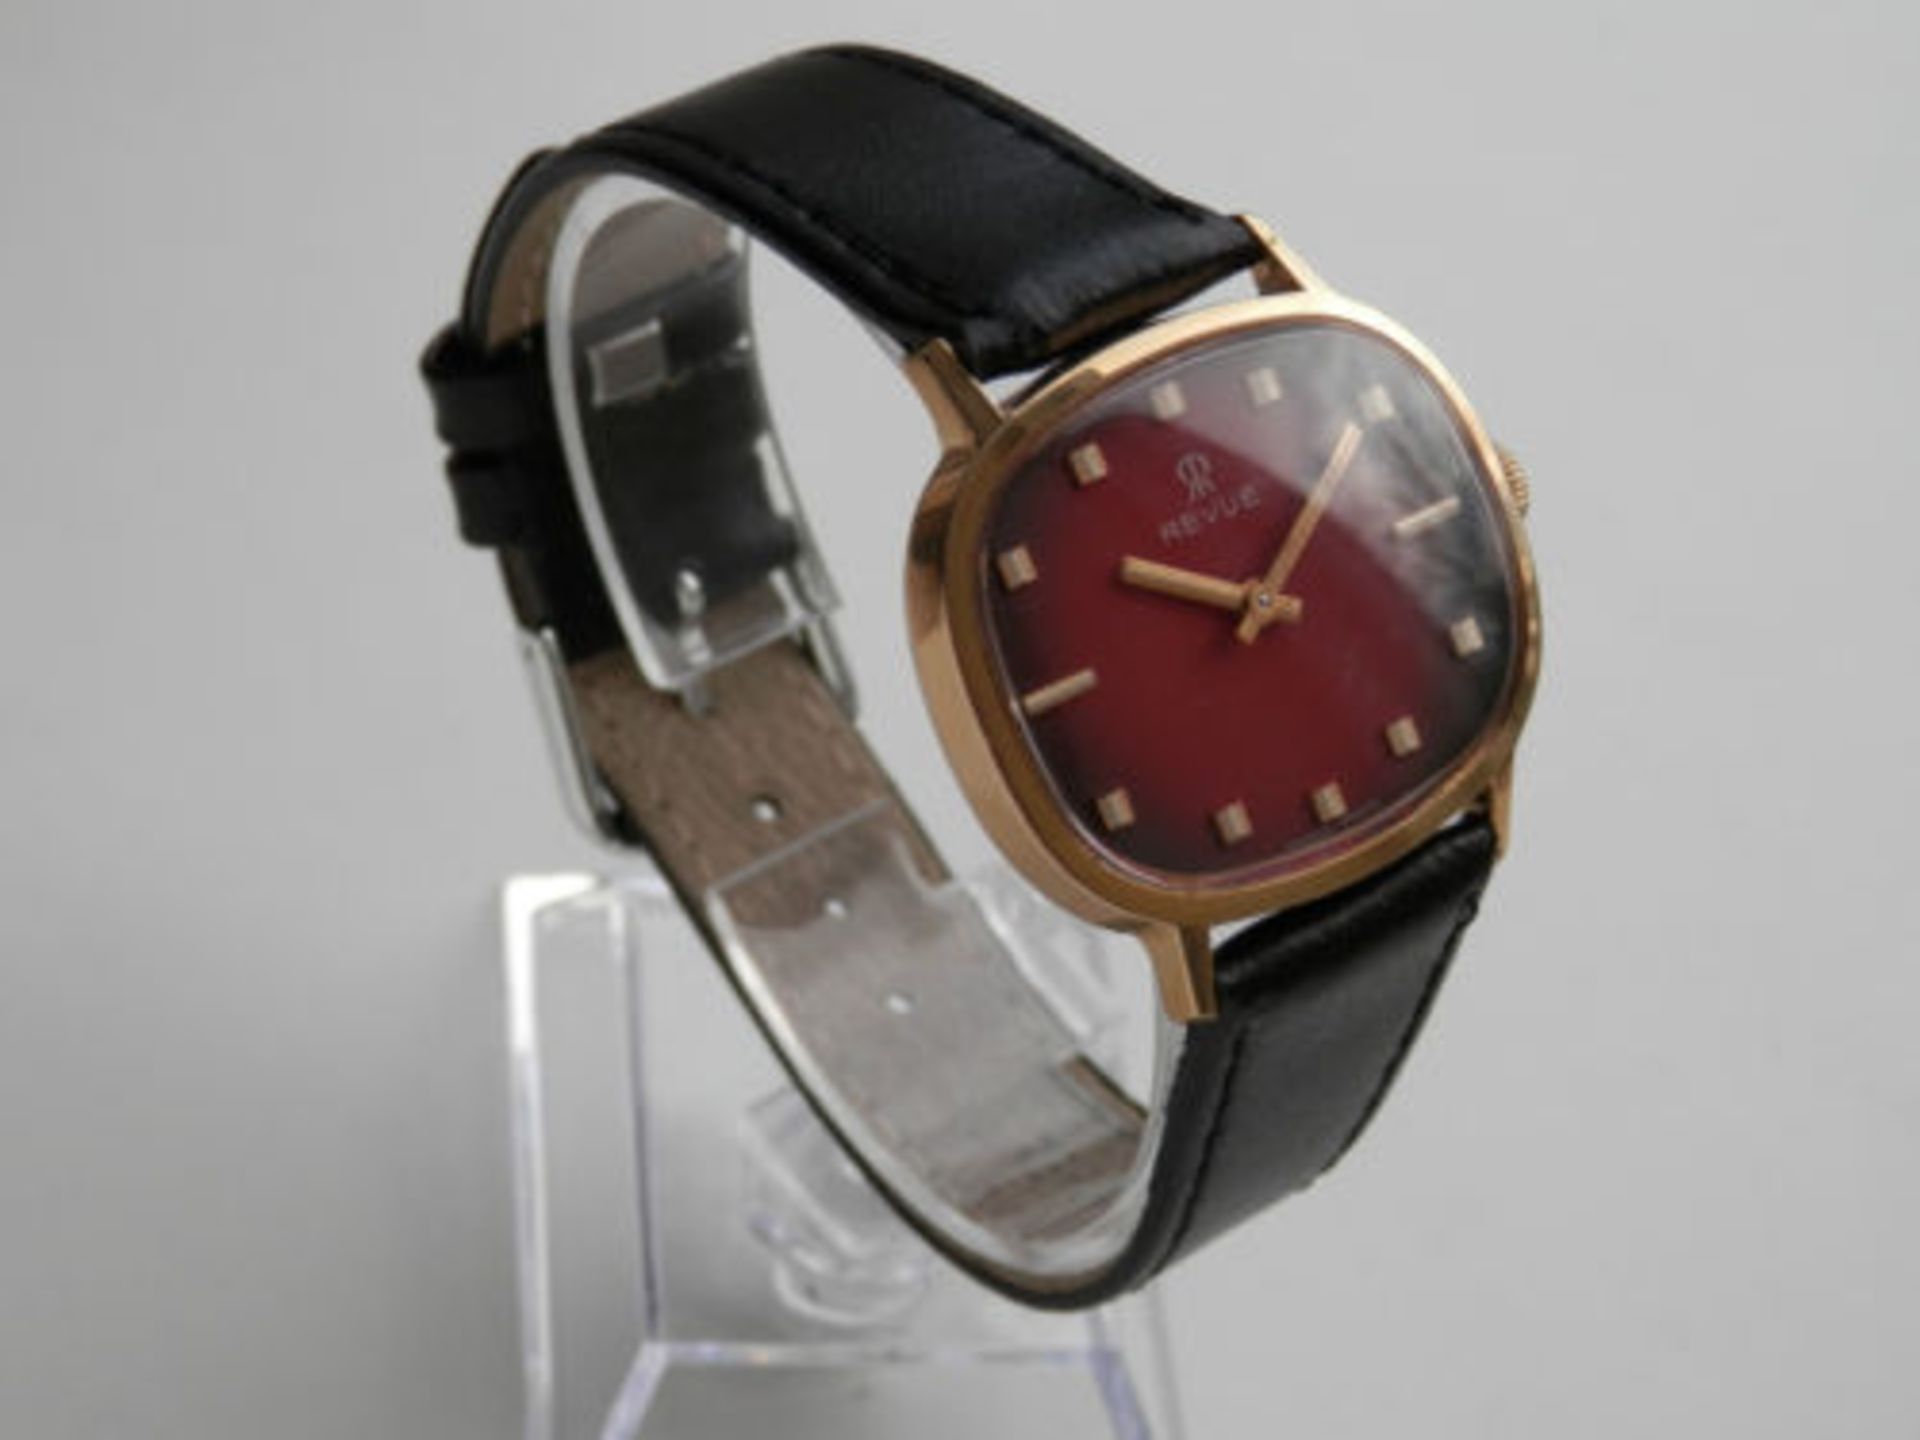 RRP £200+ RARE WORKING 1960S REVUE THOMMEN SWISS 17 JEWEL HAND WIND WATCH, CHERRY DIAL. - Image 5 of 12